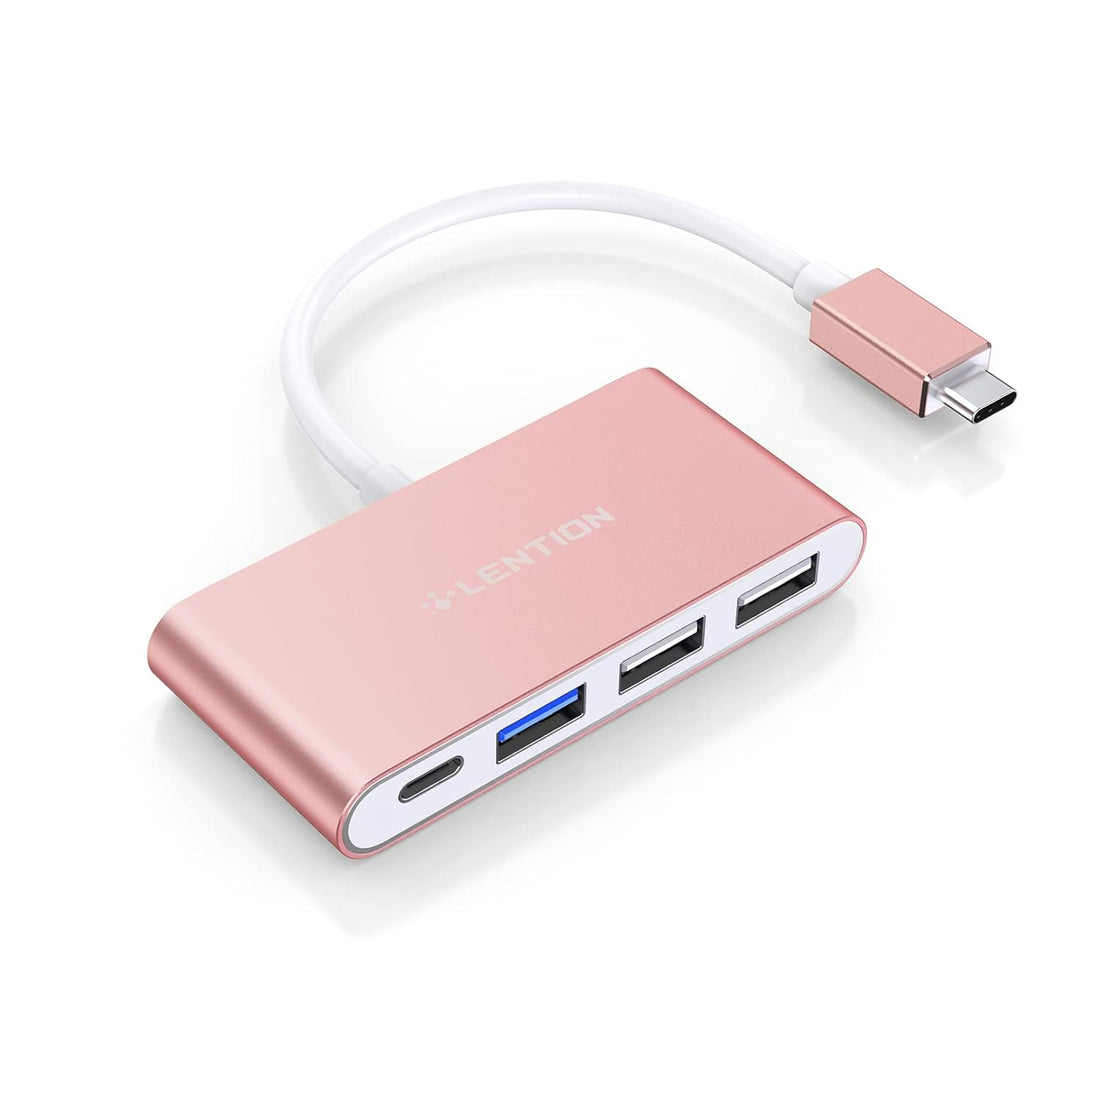 LENTION 4-in-1 USB-C Hub with Type C USB 3.0 USB 2.0 Ports for New Apple MacBook 12 New MacBook Pro 13 15 ChromeBook Pixel and More Multi-Port Charging Connecting Adapter - Rose Gold